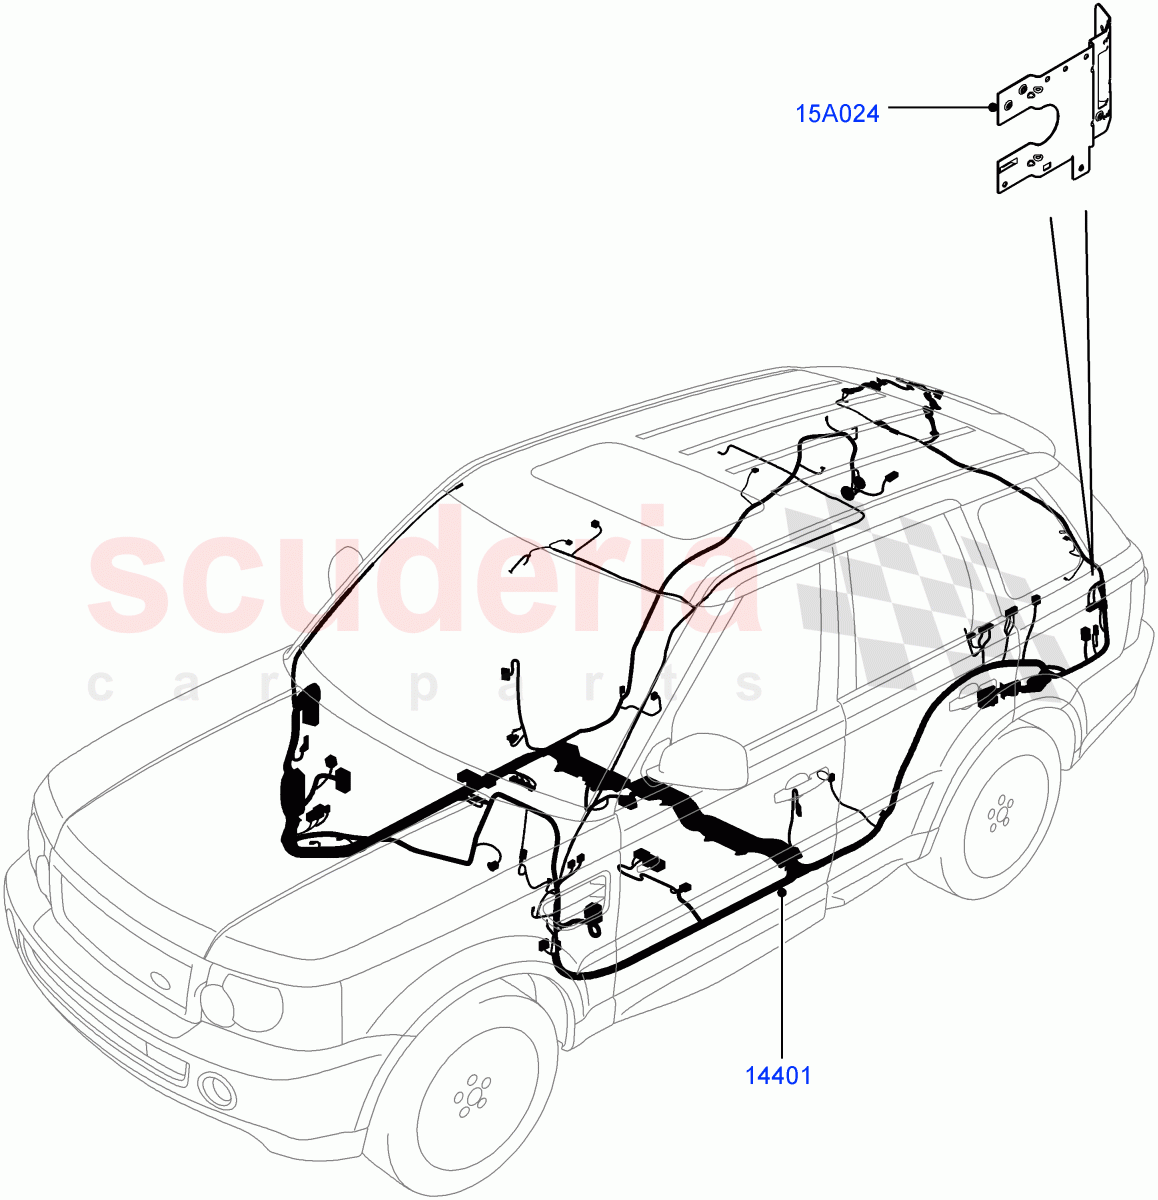 Electrical Wiring - Engine And Dash(Main Harness)((V)FROMCA000001) of Land Rover Land Rover Range Rover Sport (2010-2013) [5.0 OHC SGDI NA V8 Petrol]